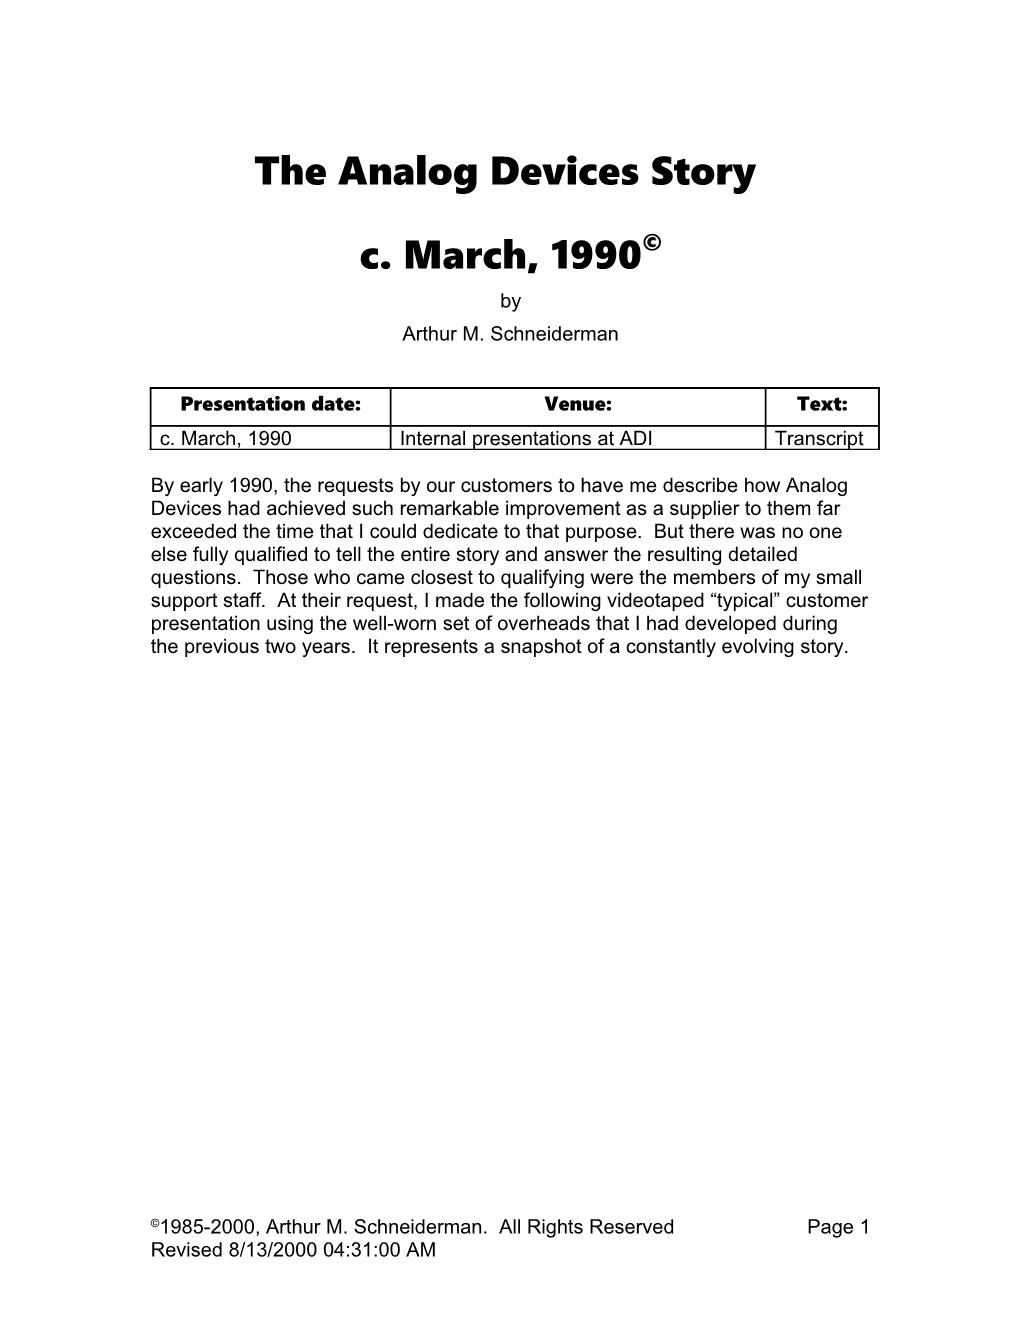 The Analog Devices Story